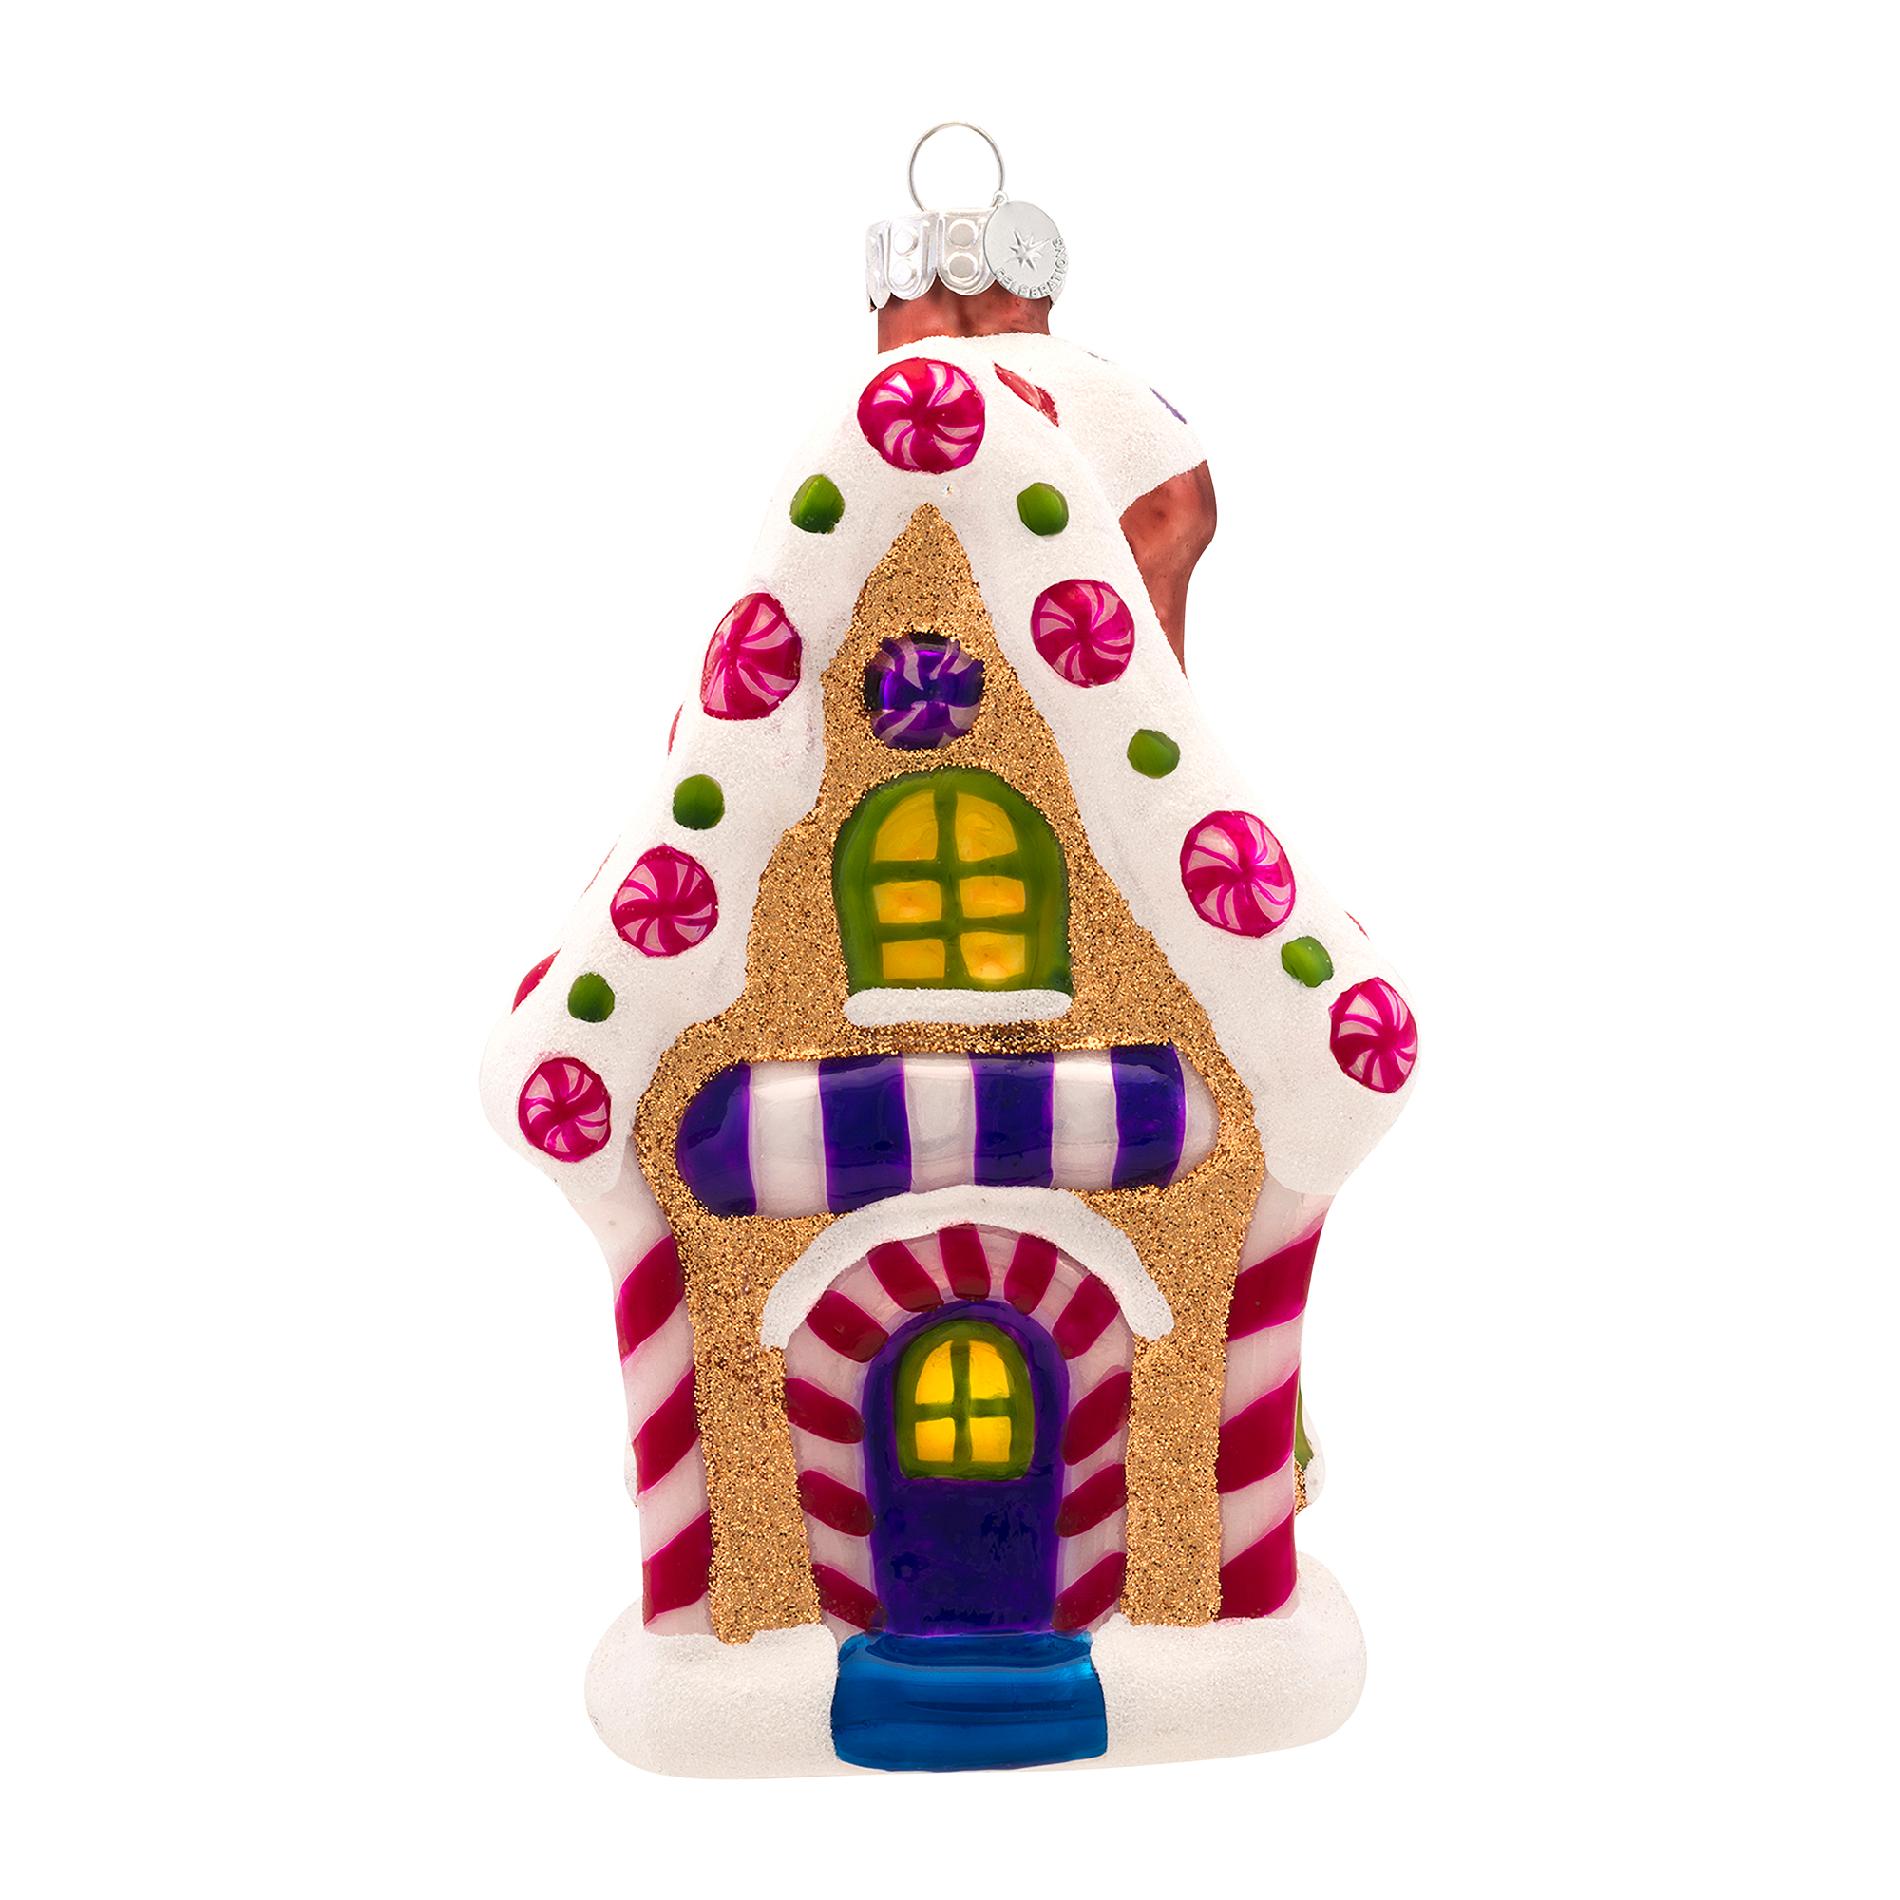 Celebrations by Radko &#174; - Gingerbread House, 5 in